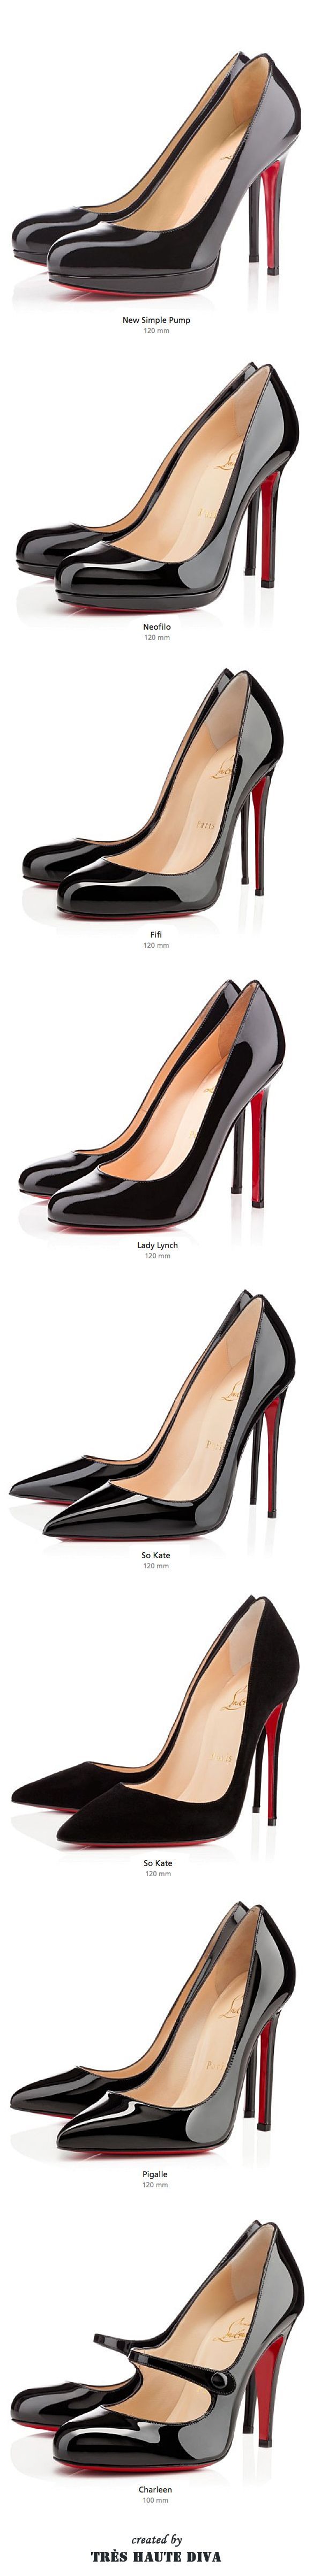 Crazy for Christian Louboutin #high